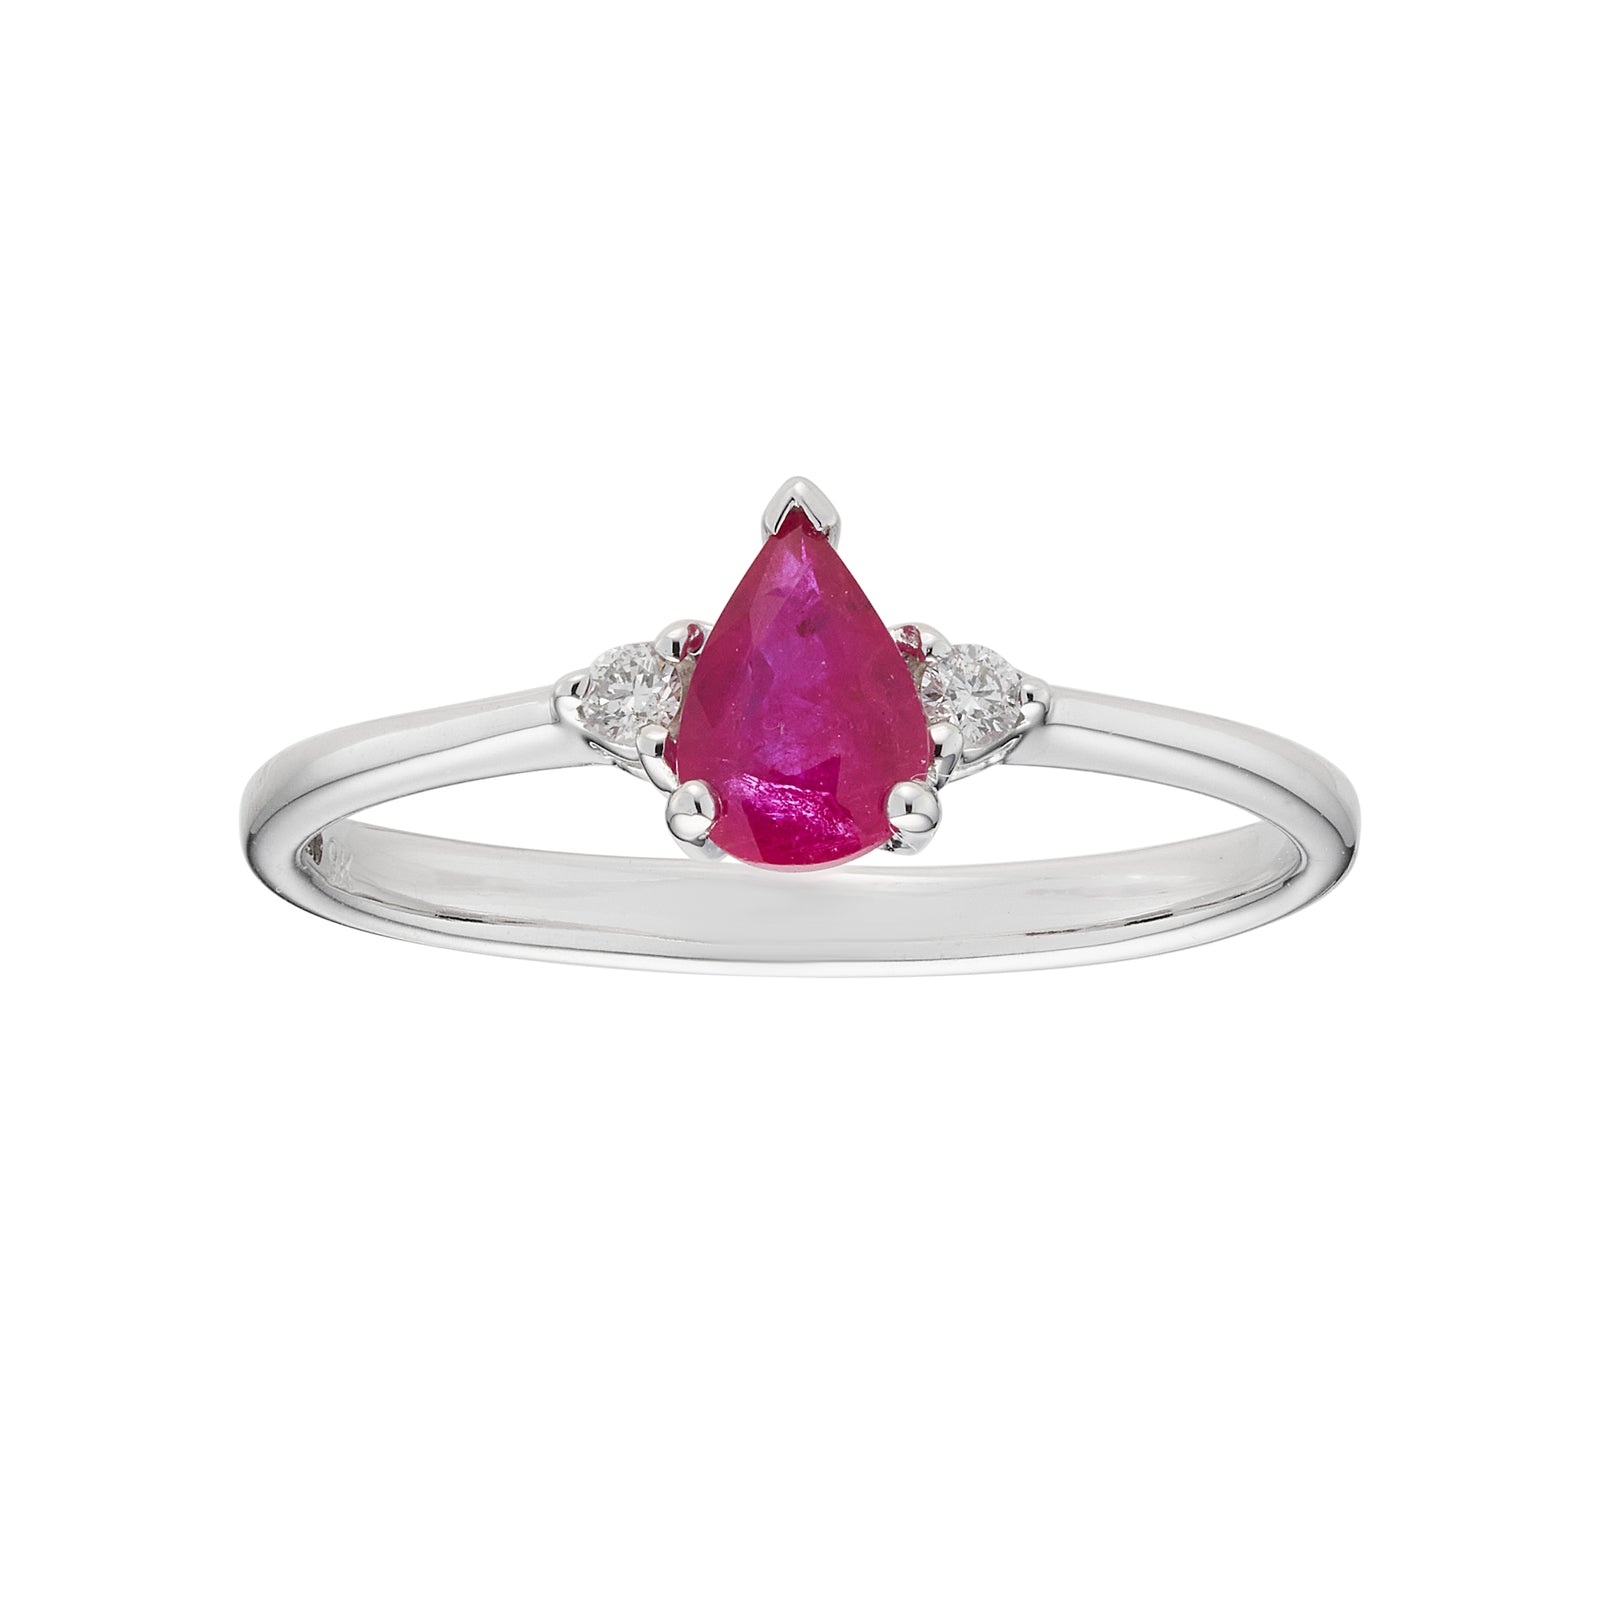 9ct white gold 6x4mm pear shape ruby & diamond ring 0.04cts